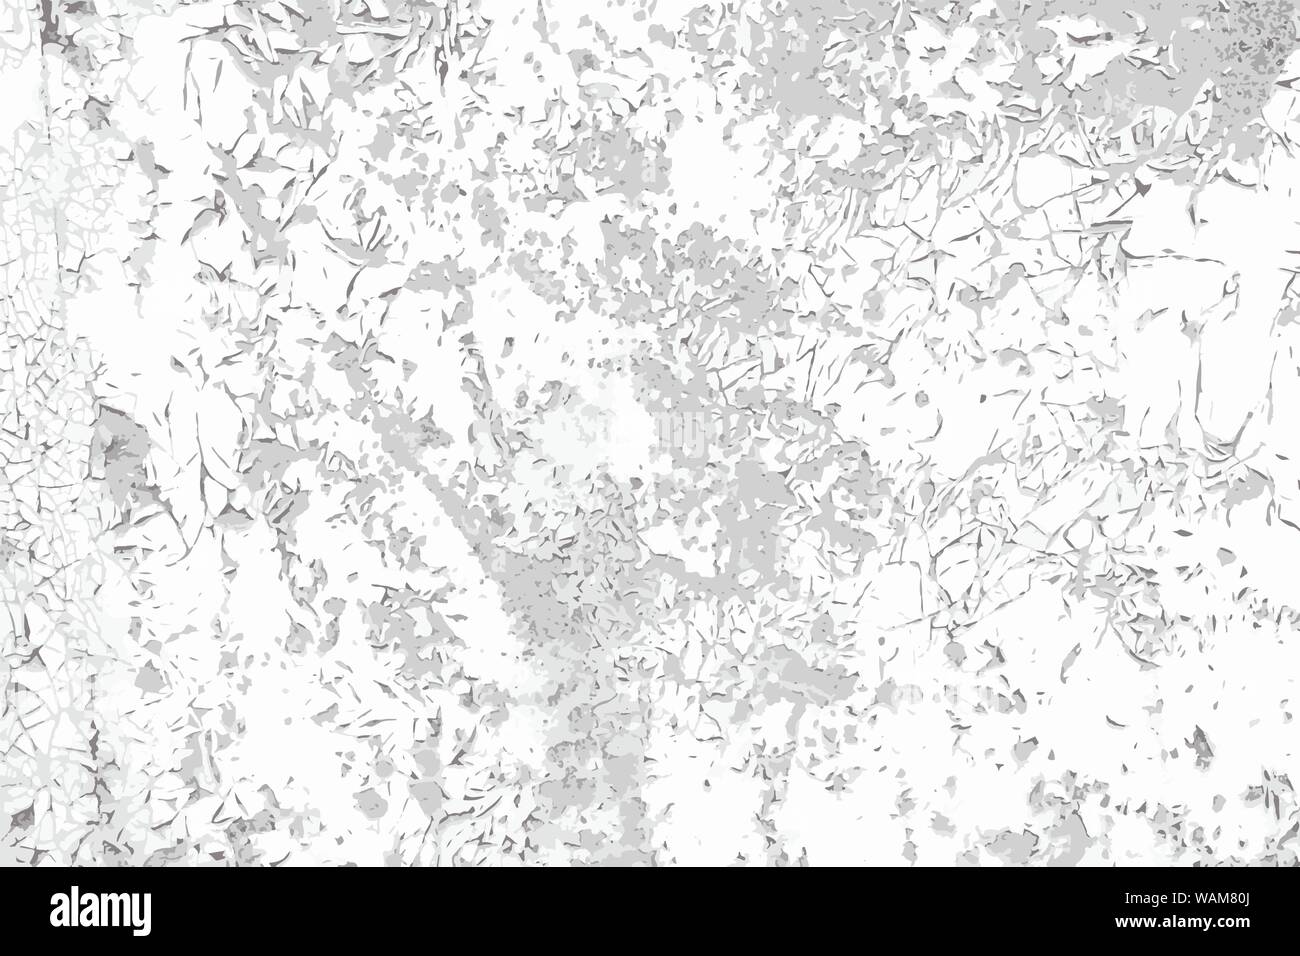 Cracked paint vector black and white texture background. Grunge scratch old wall template for overlay artwork. Stock Vector